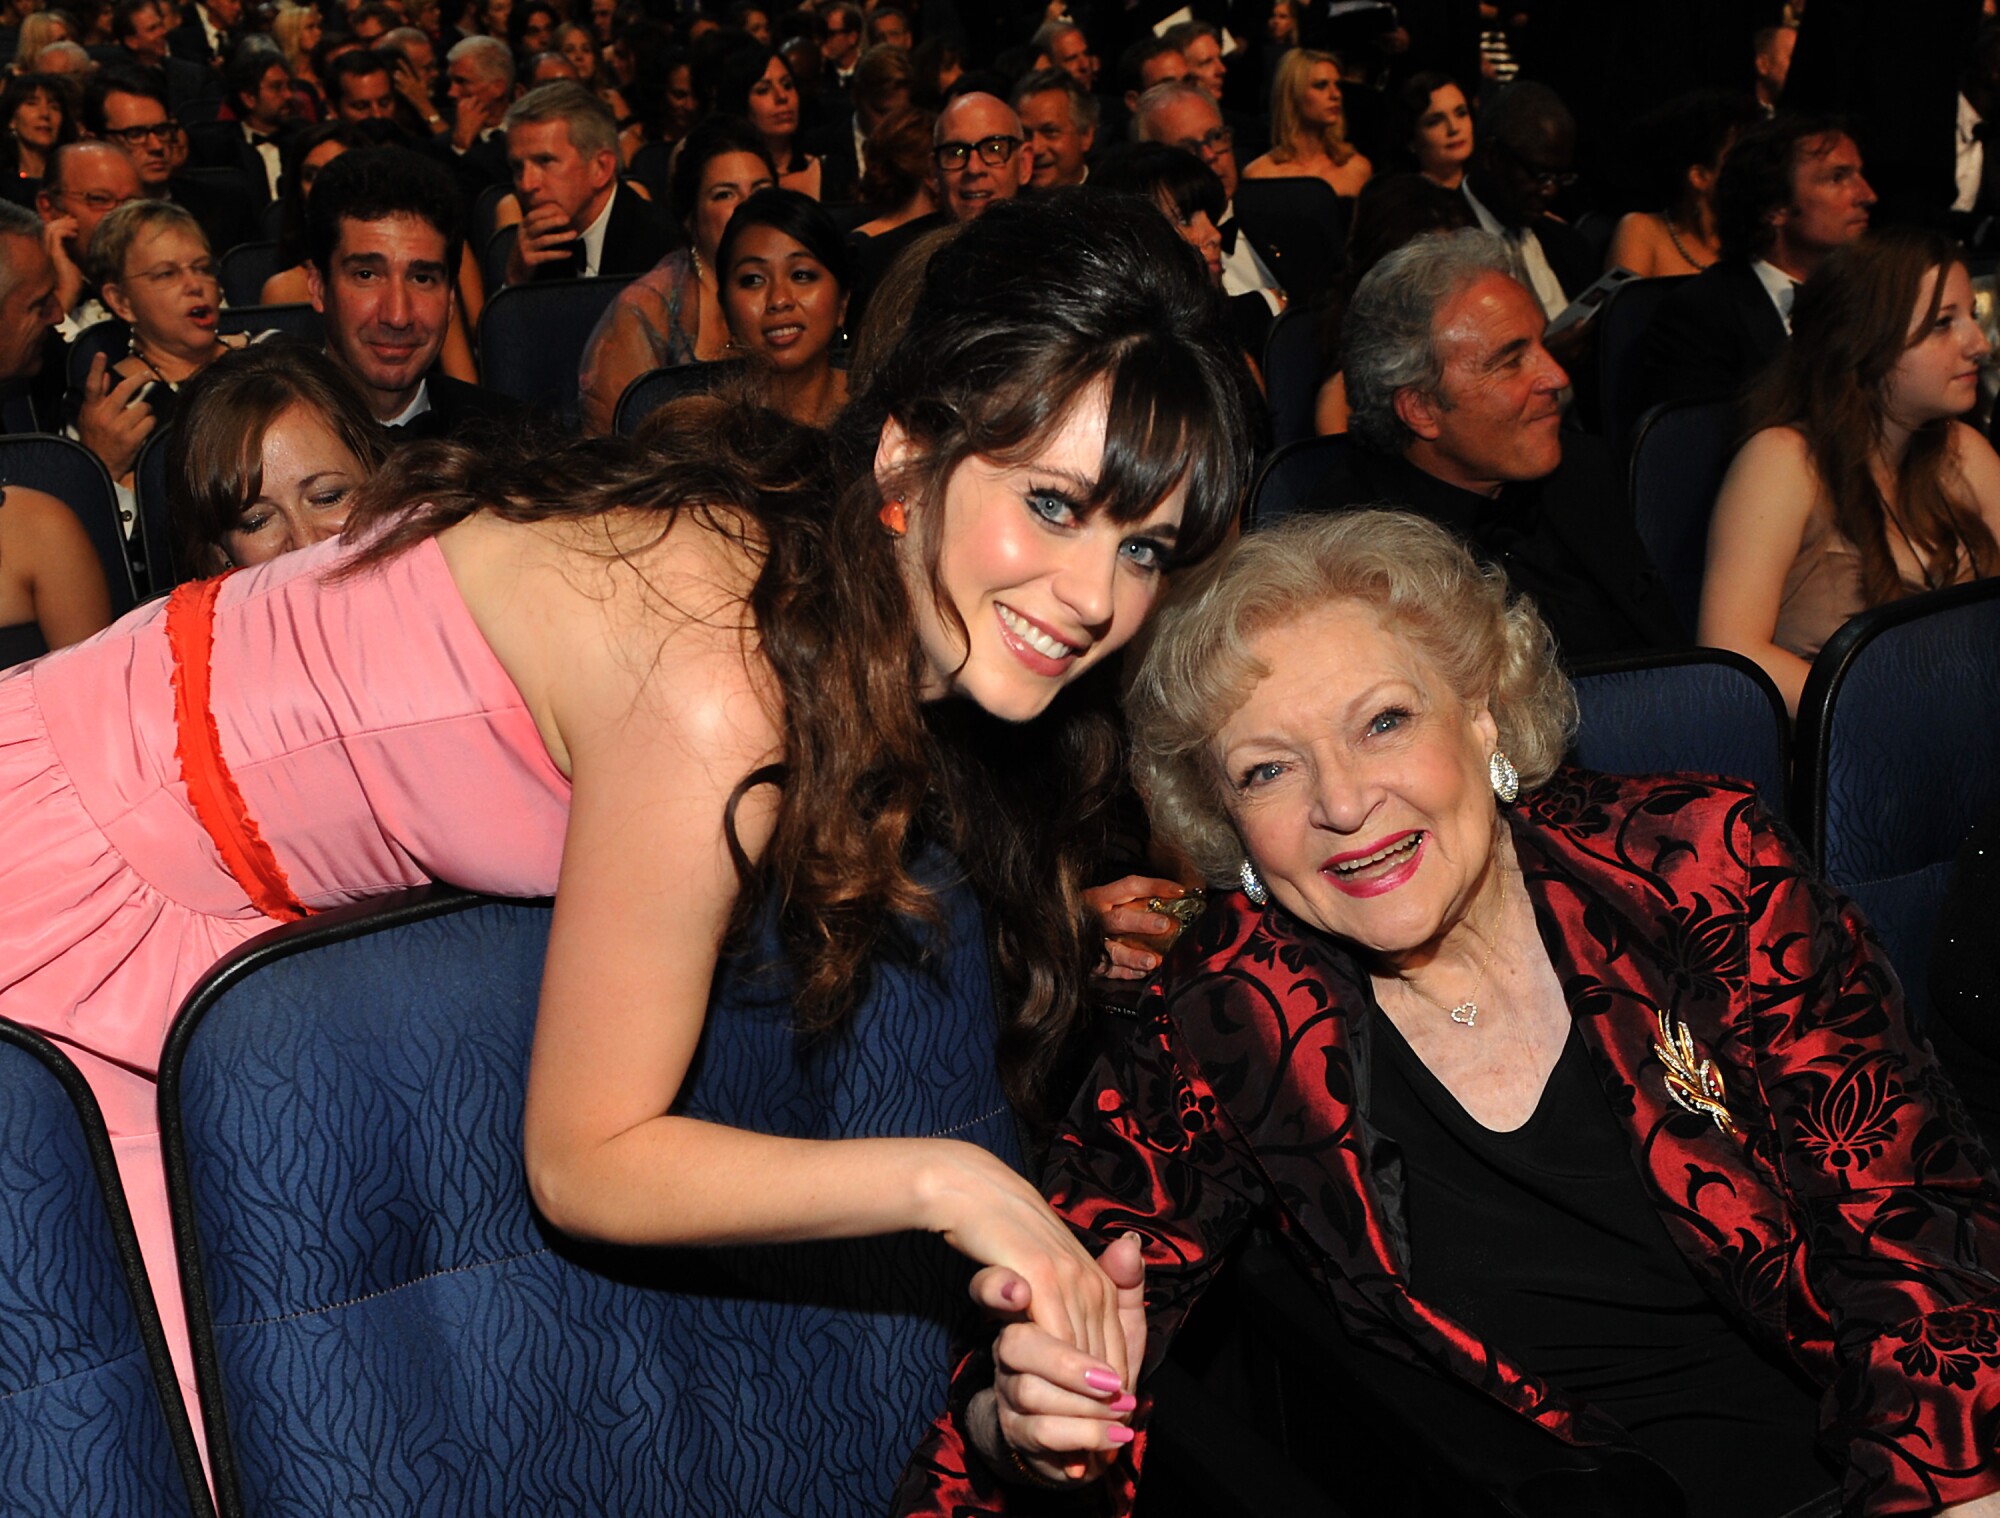 Zooey Deschanel and Betty White during Emmy Awards at Nokia Theatre L.A. Live on September 18, 2011.